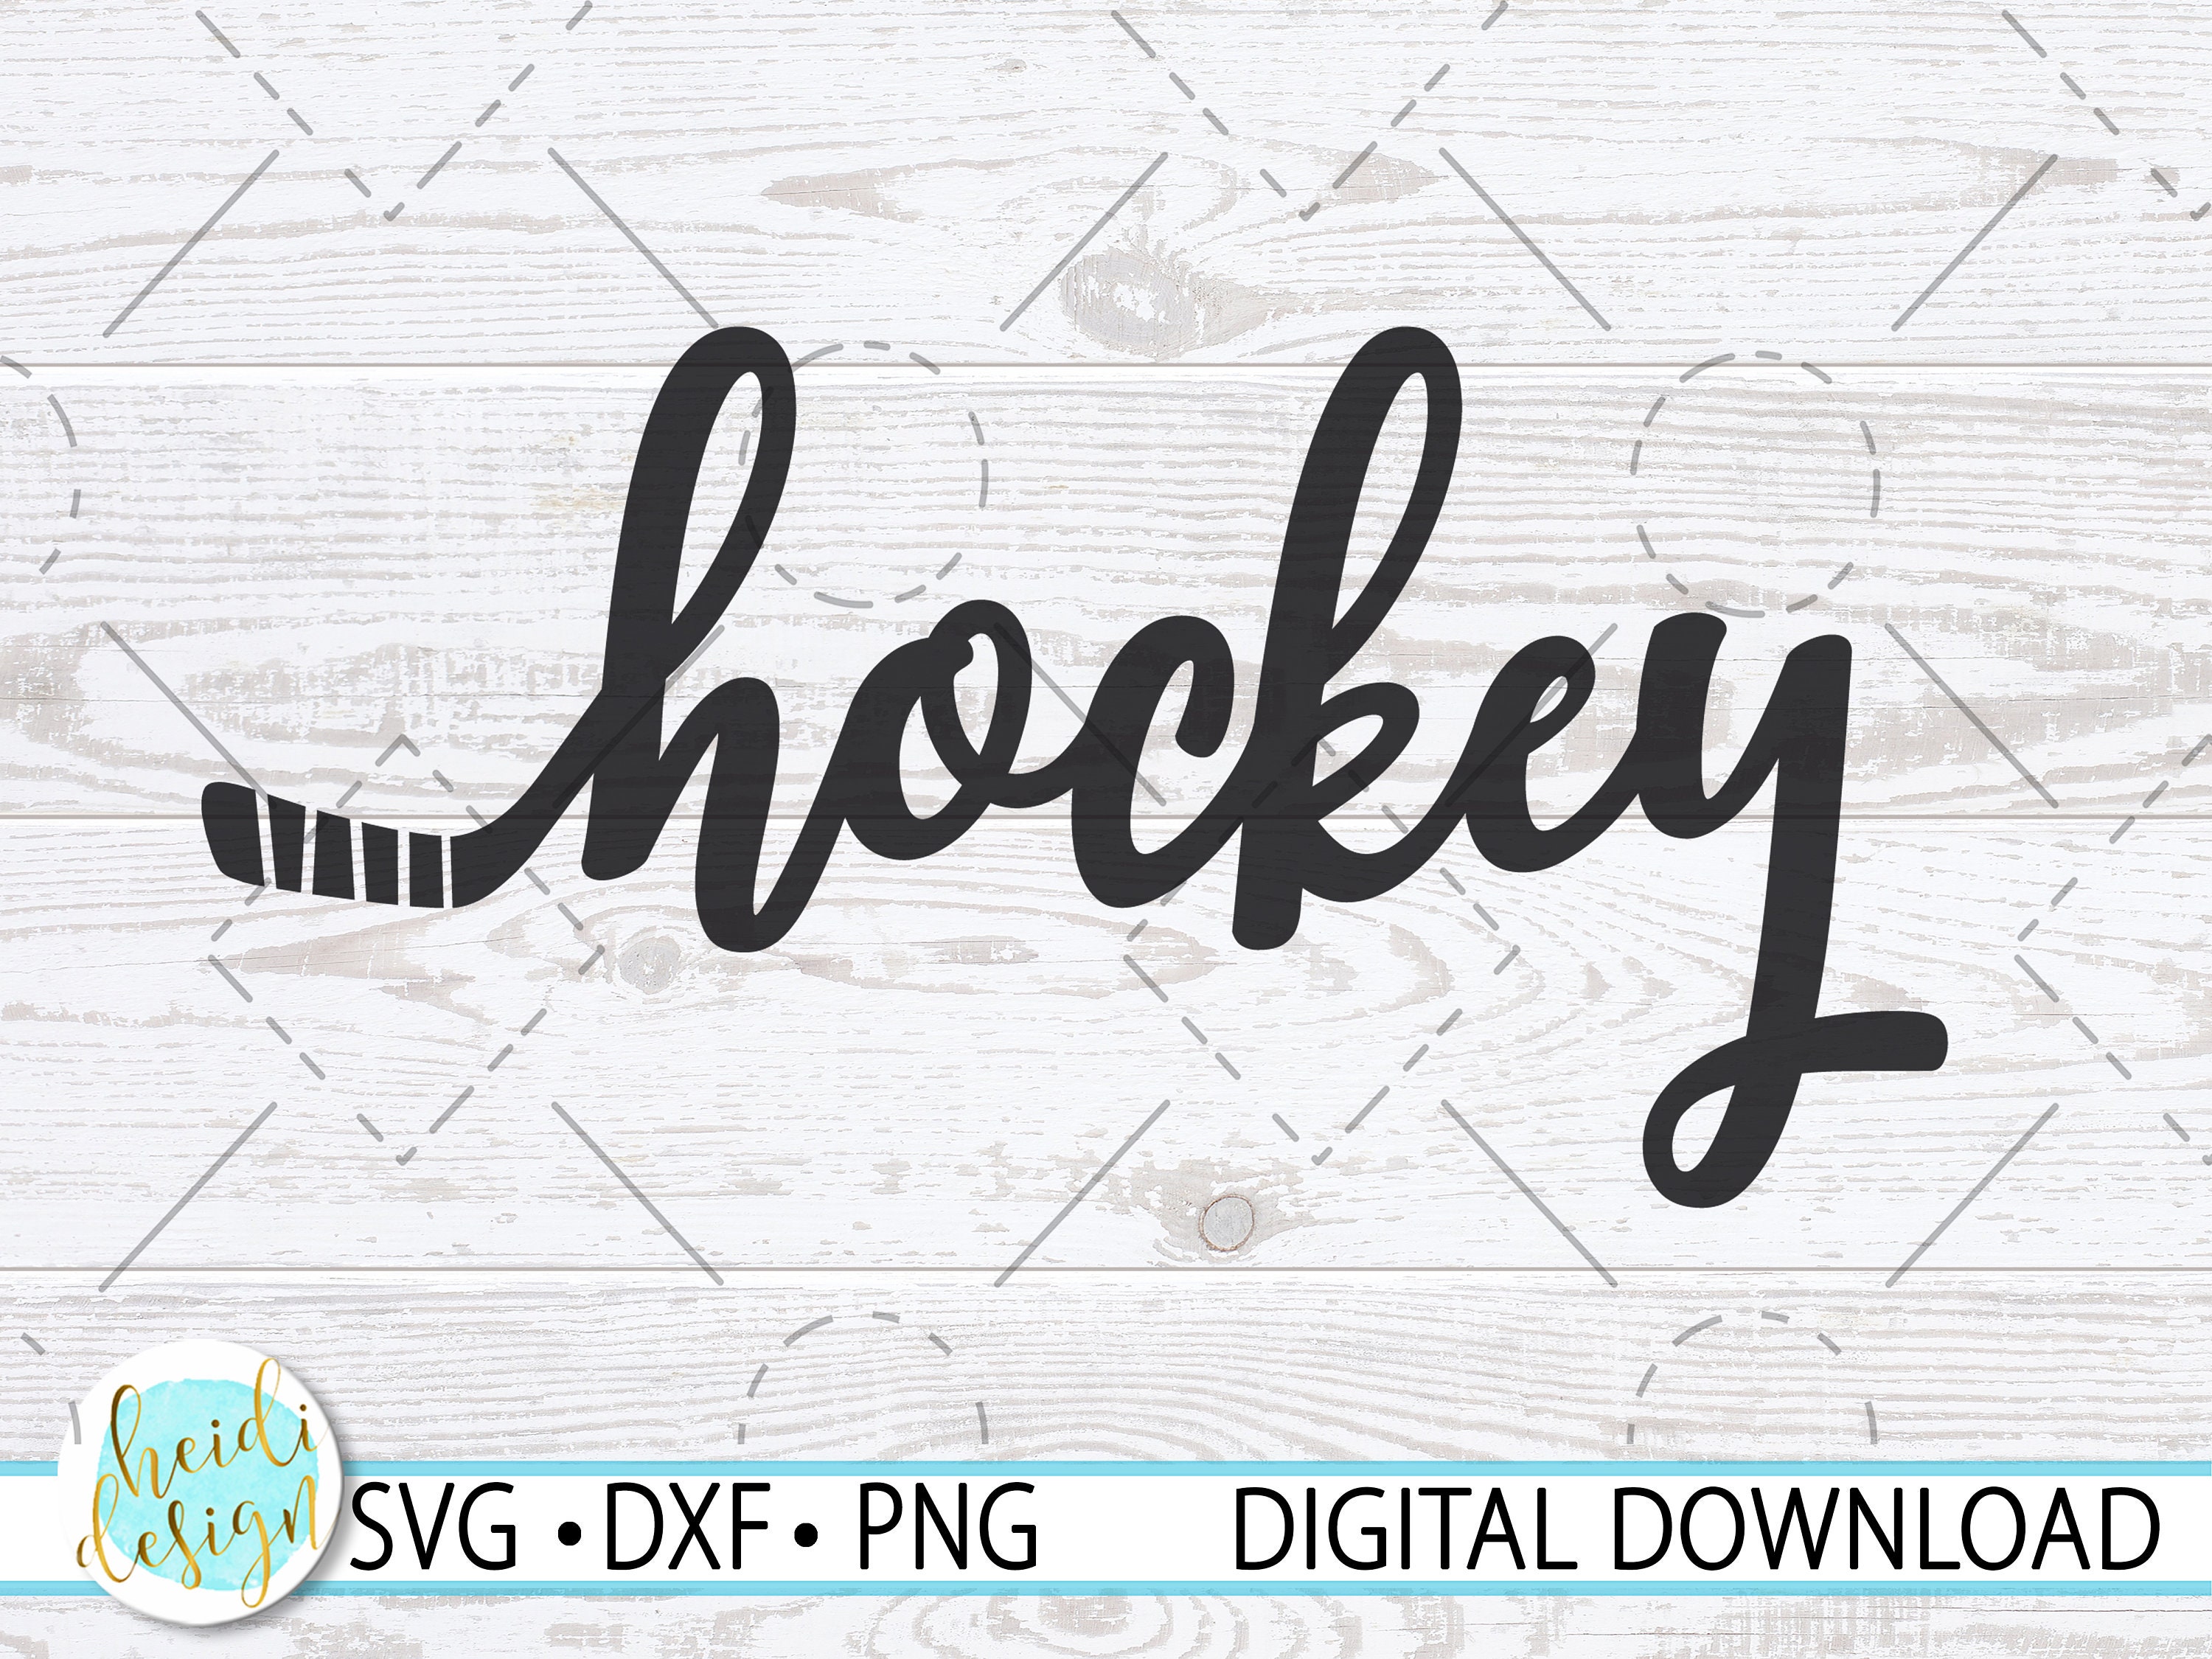 African-American Hockey Referee SVG Cut file by Creative Fabrica